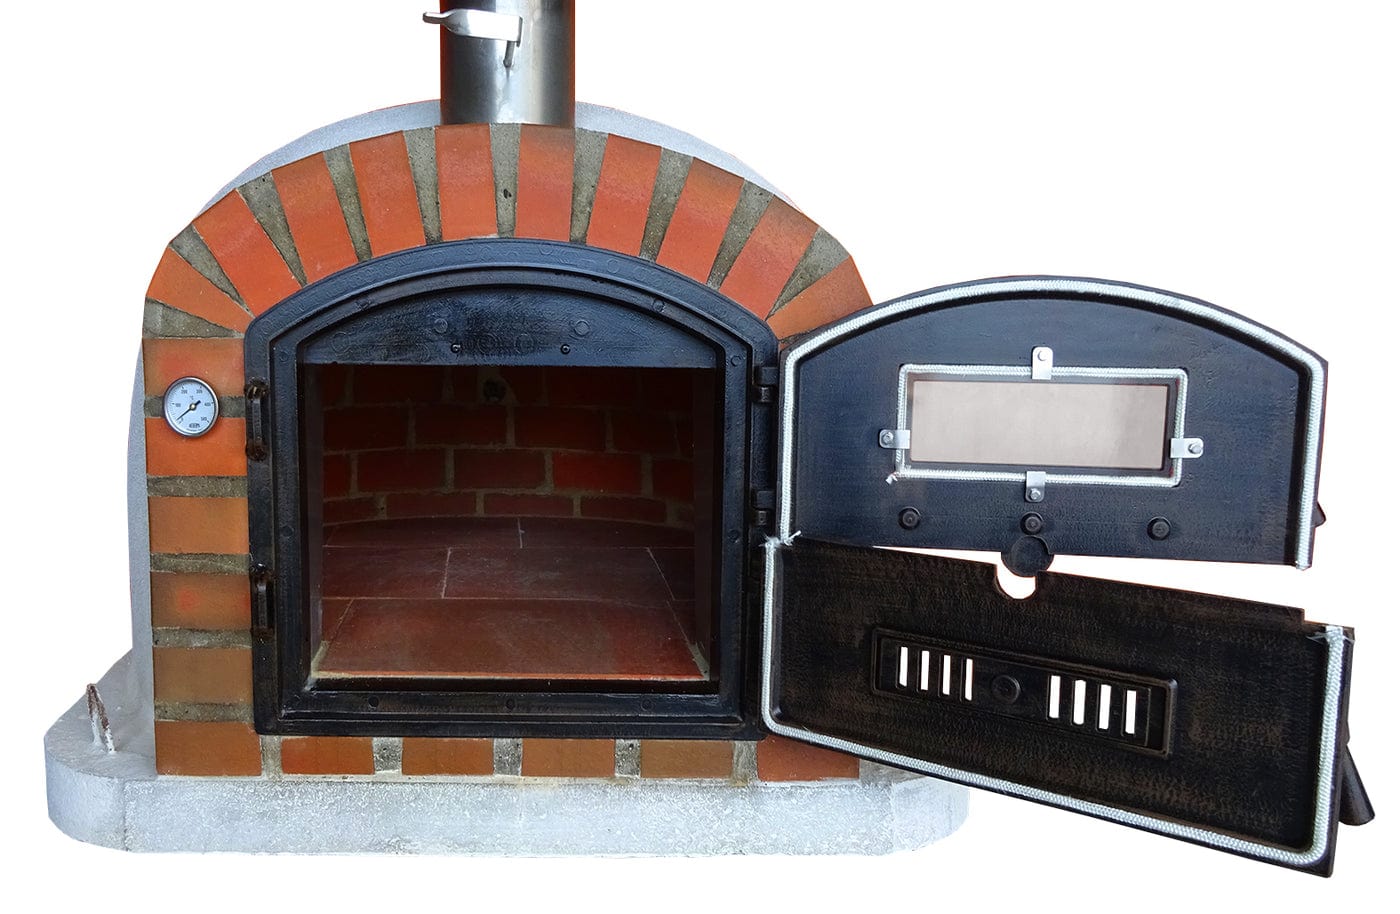 Authentic Pizza Ovens Large ‘Maximus Prime’ BLACK Portable Wood-Fired Pizza  Oven / Handmade, Stacked Stone, Bake, Roast / PRIMEB